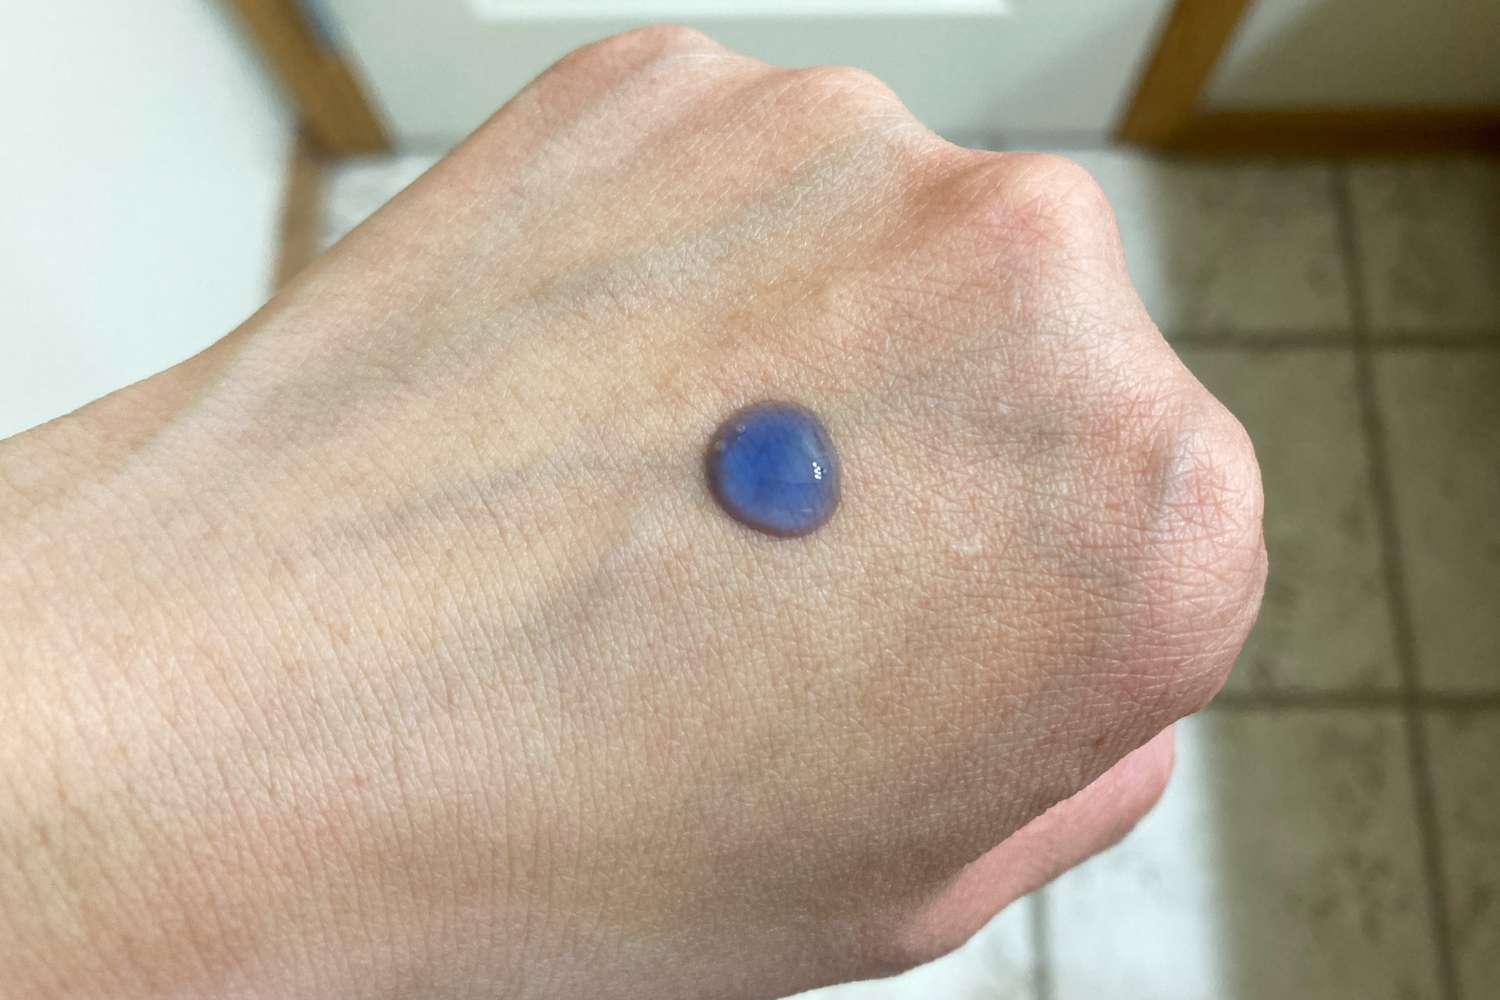 A small drop of The Ordinary Multi-Peptide + Copper Peptides 1% Serum on the back of a hand